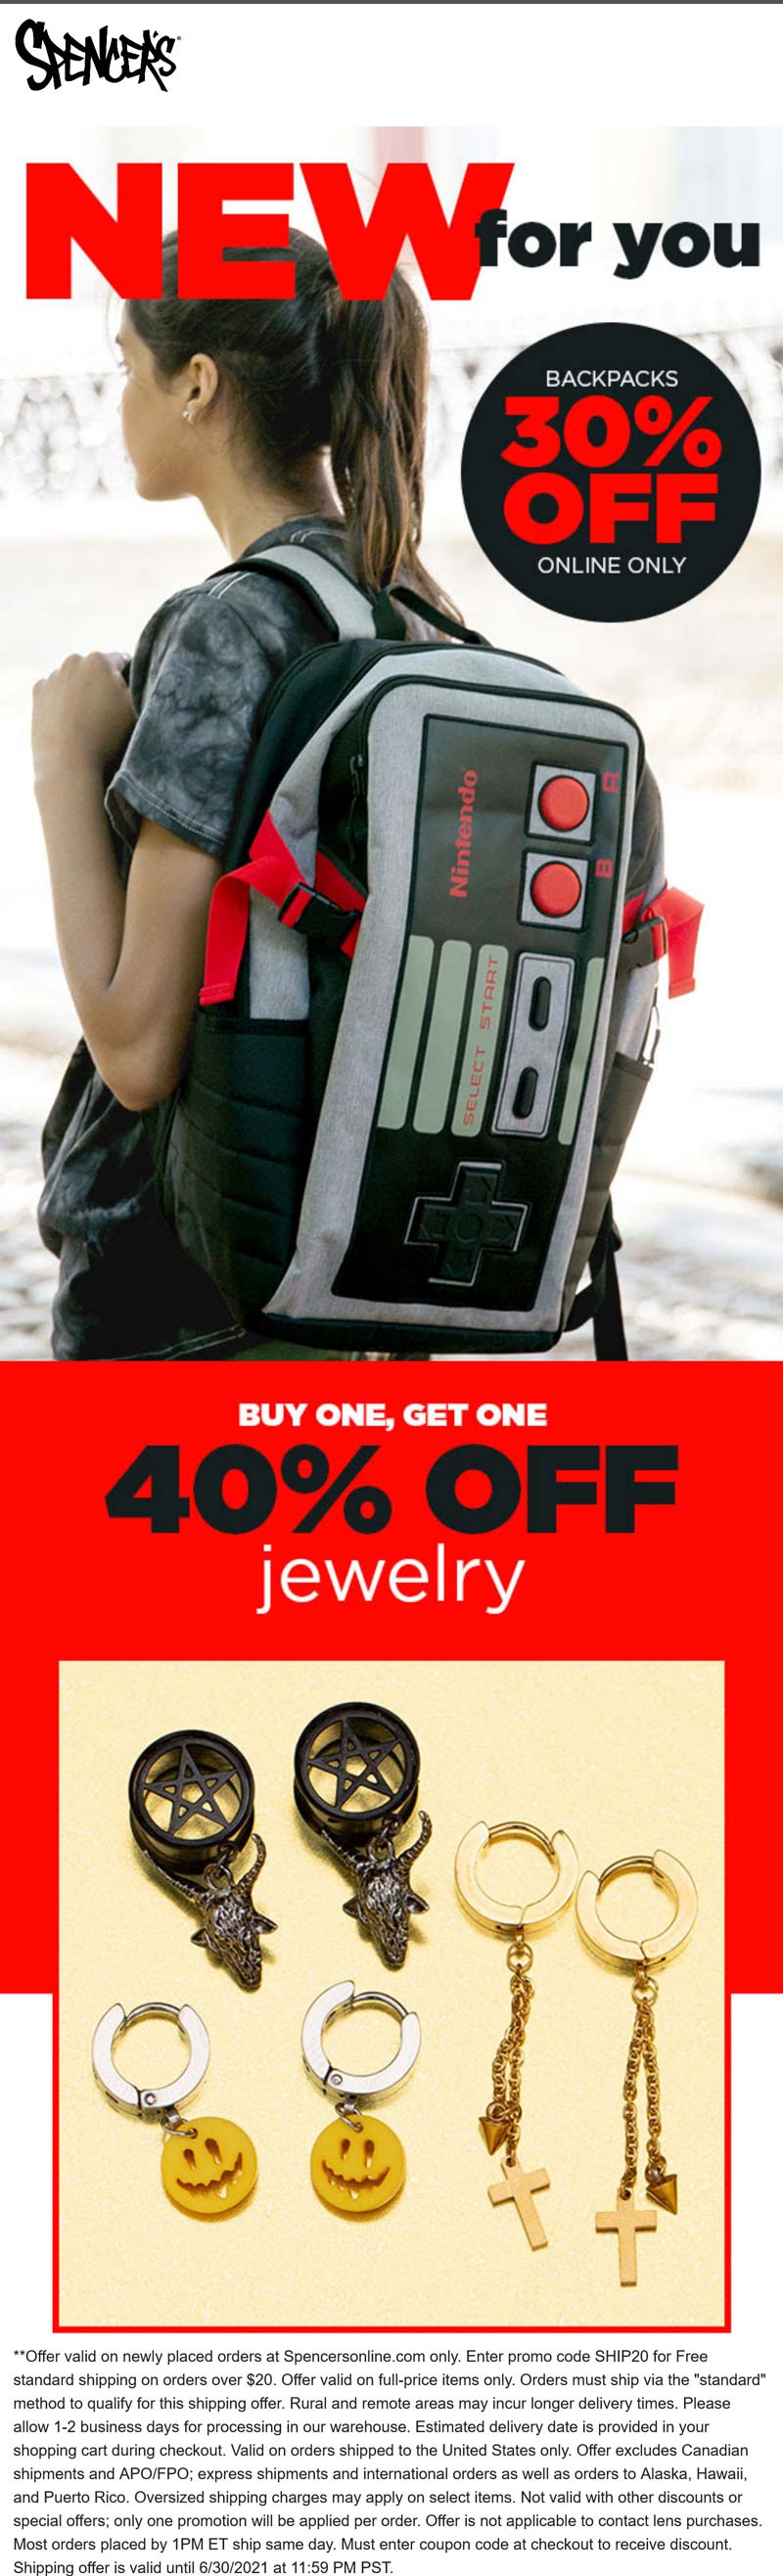 Spencers stores Coupon  30% off backpacks online at Spencers #spencers 